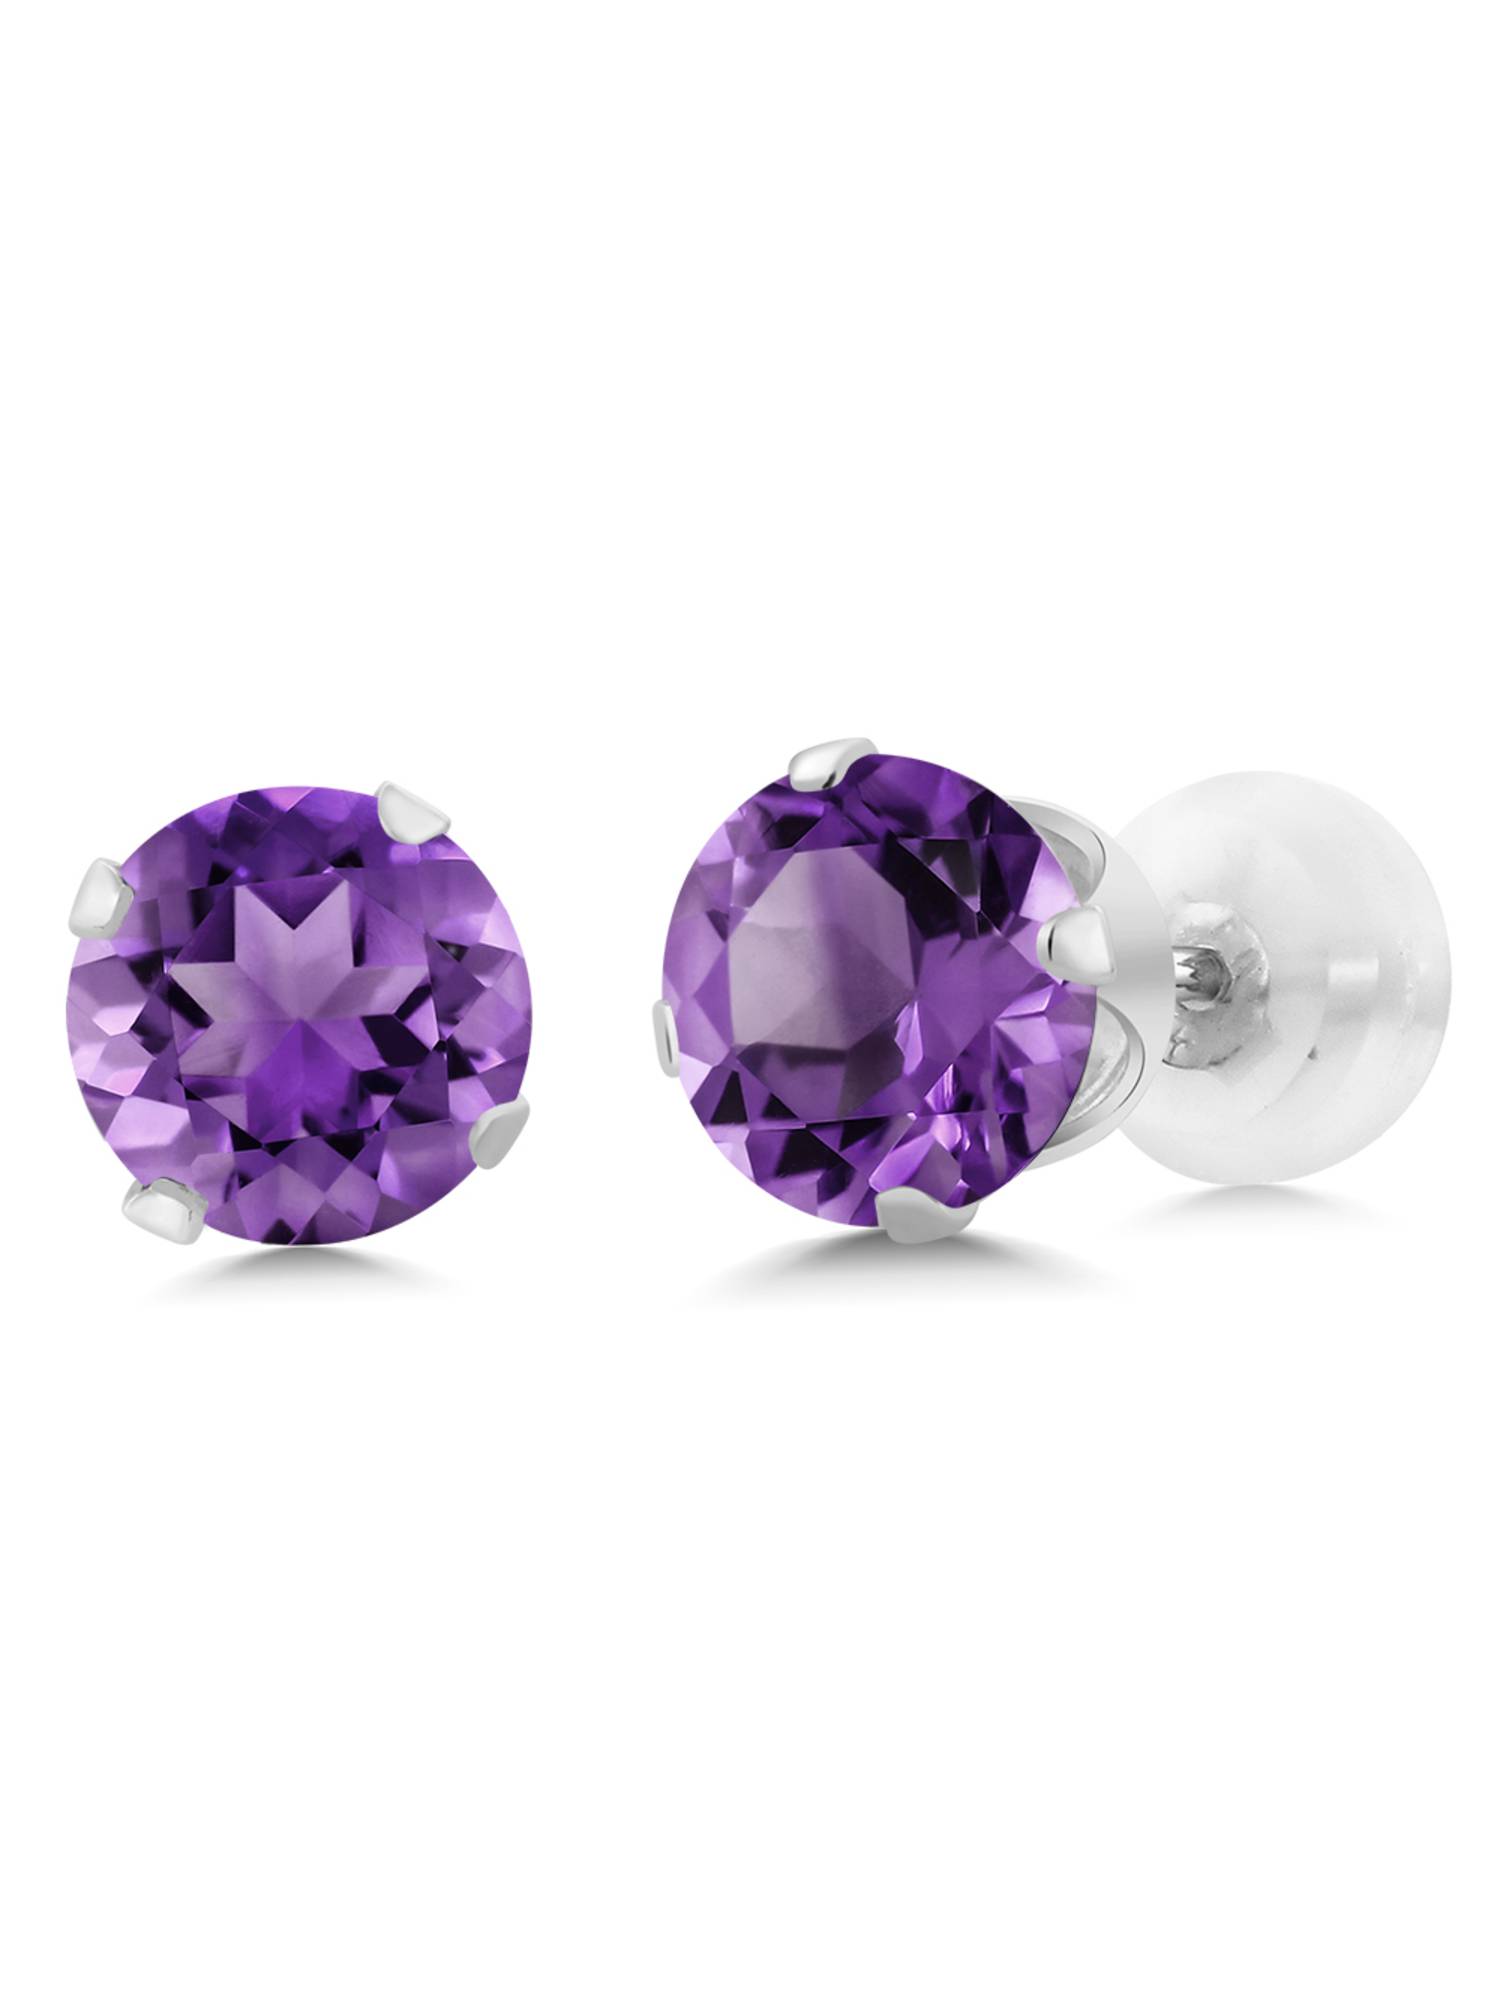 1.5 Cttw Pear Cut Simulated Amethyst Solitaire Stud Earrings In 10K Gold 